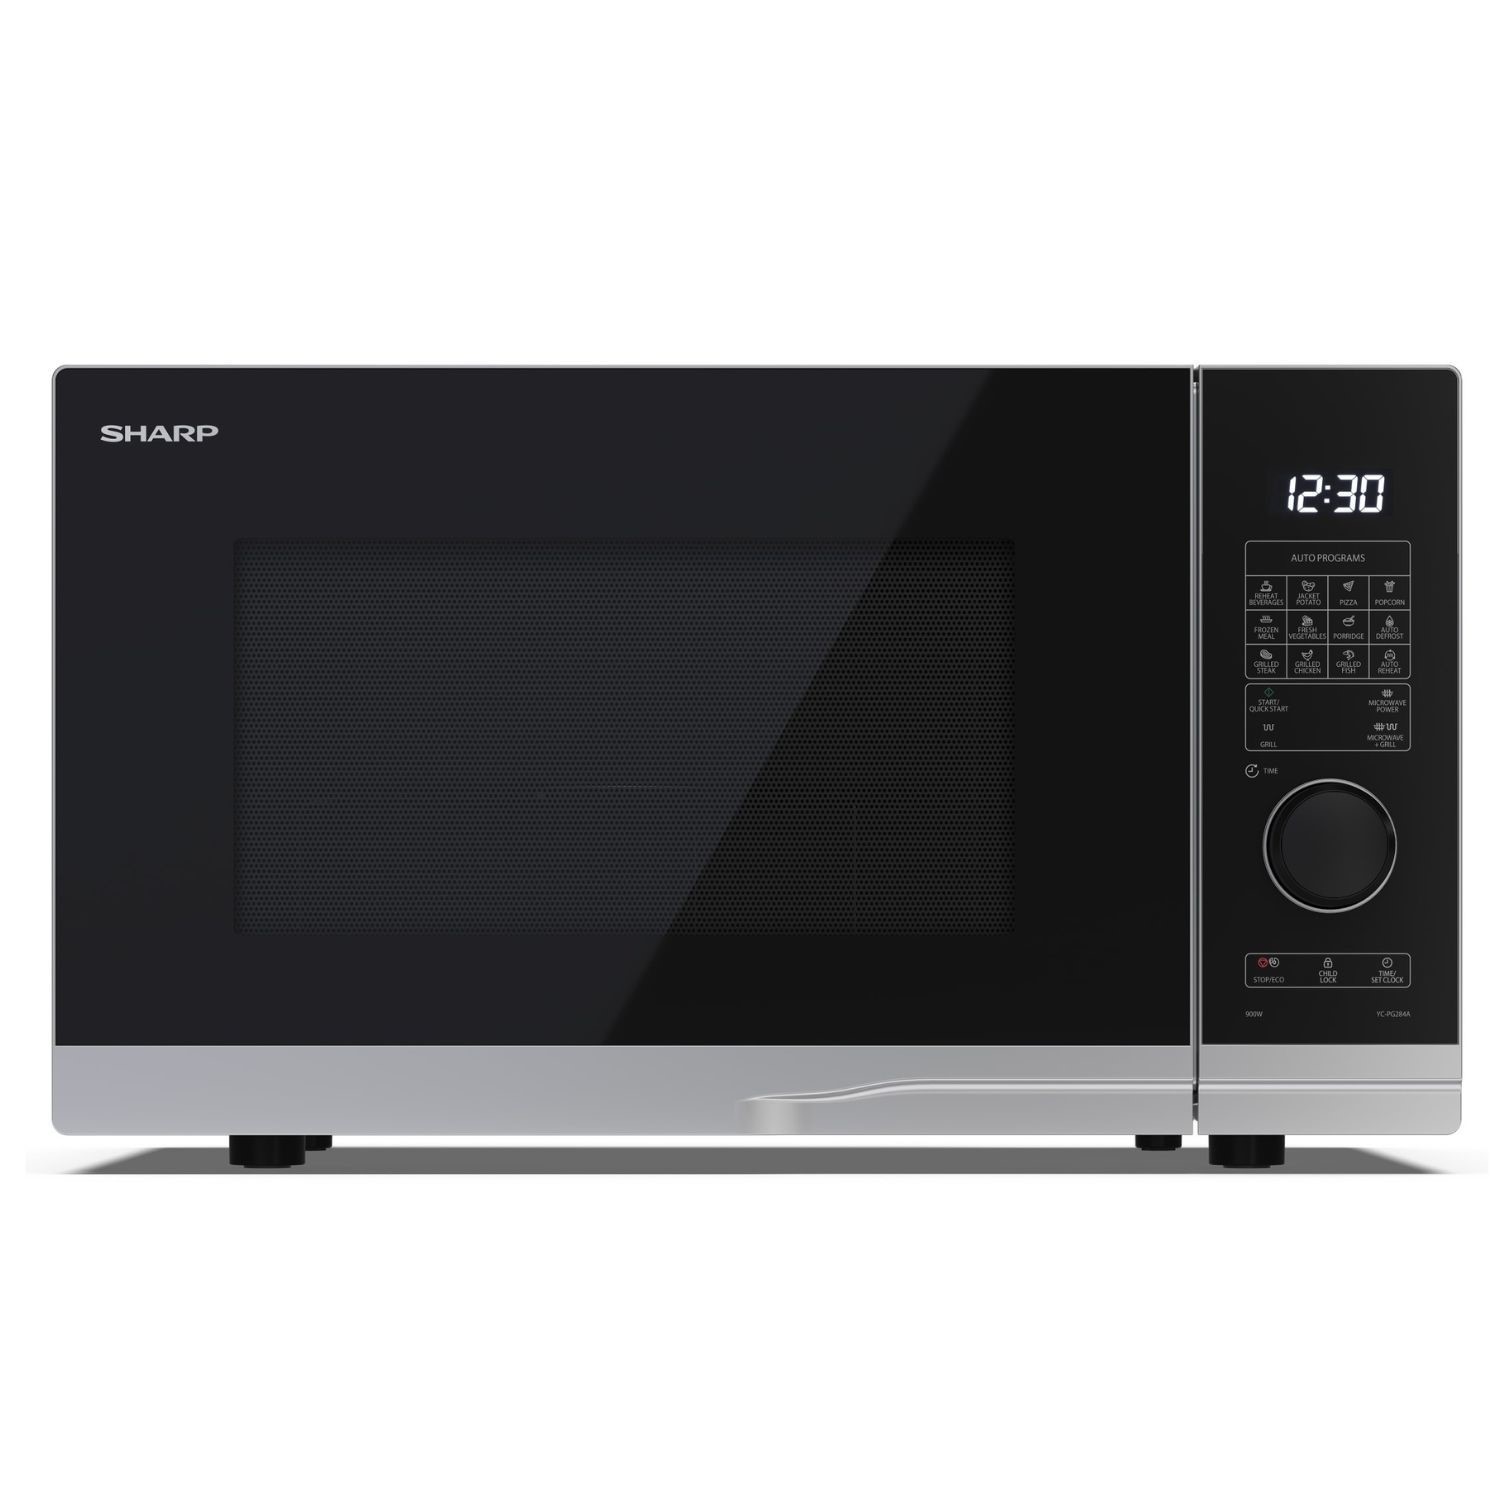 Photos - Other for Computer Sharp YCPG284AUS 28L 900W Digital Microwave with Grill - Silver YC-PG284AU 